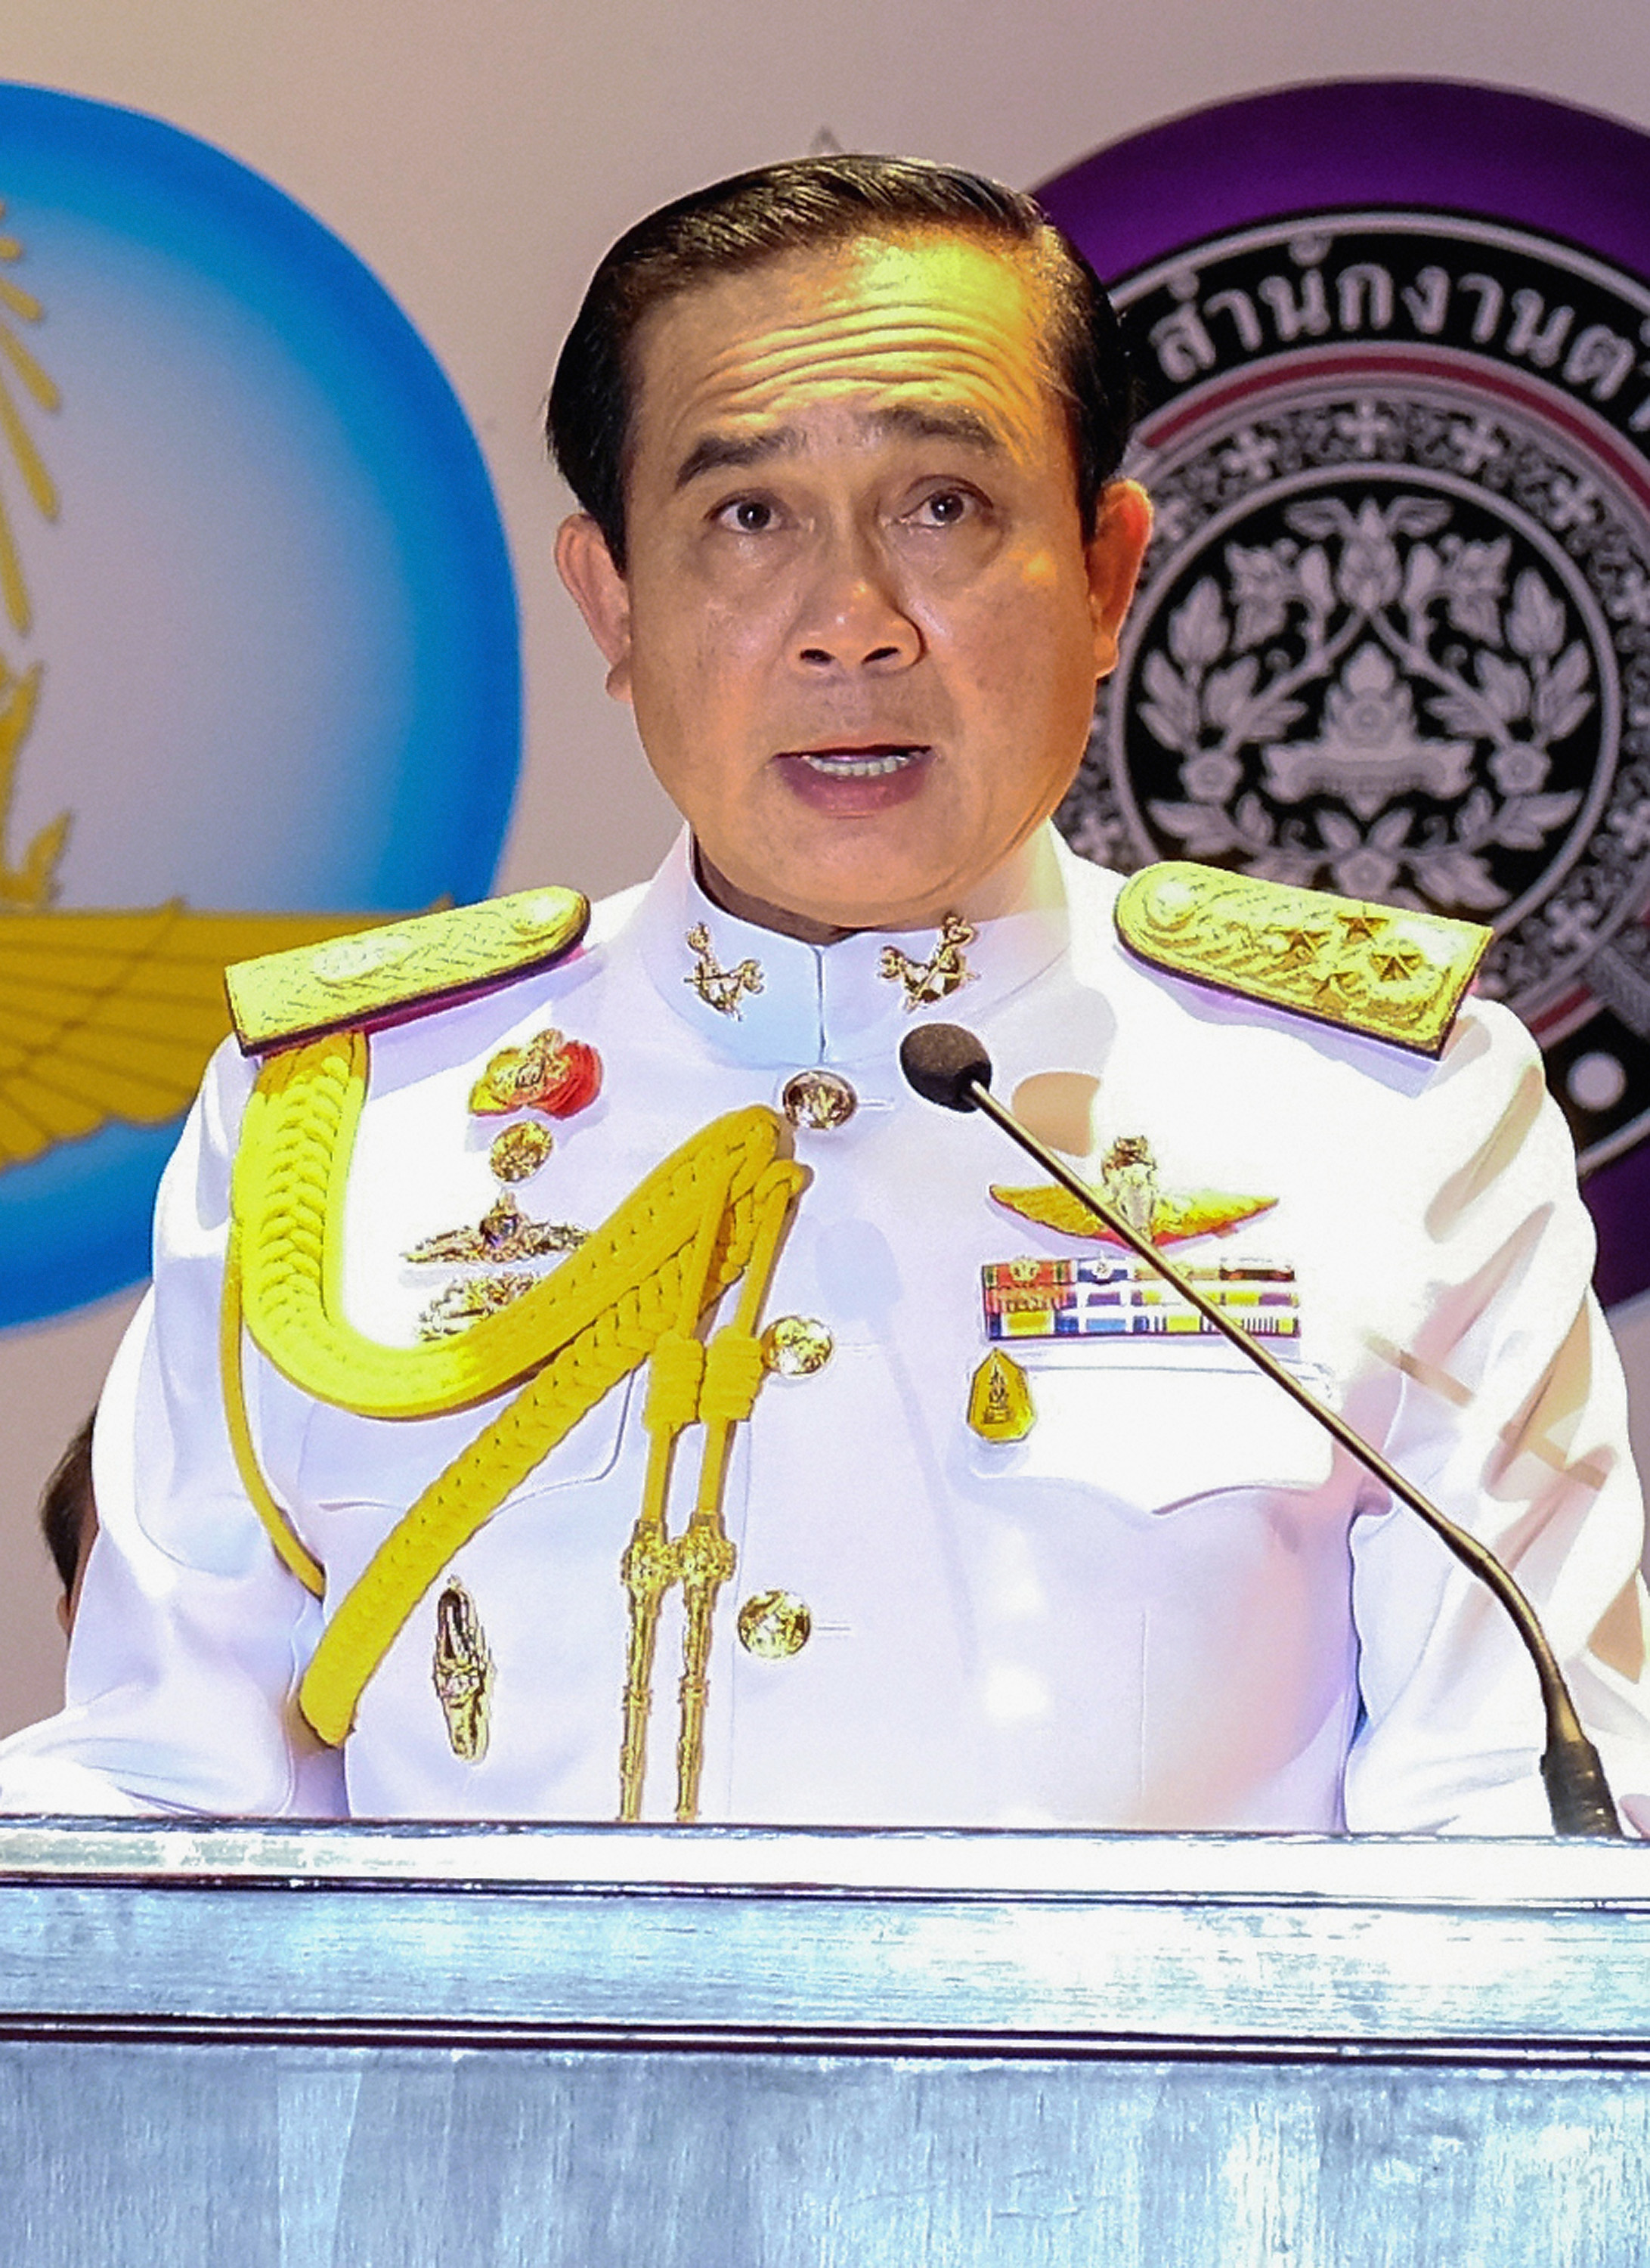 Thailand's Military Coup Continues As General Prayuth Receives Royal Endorsement